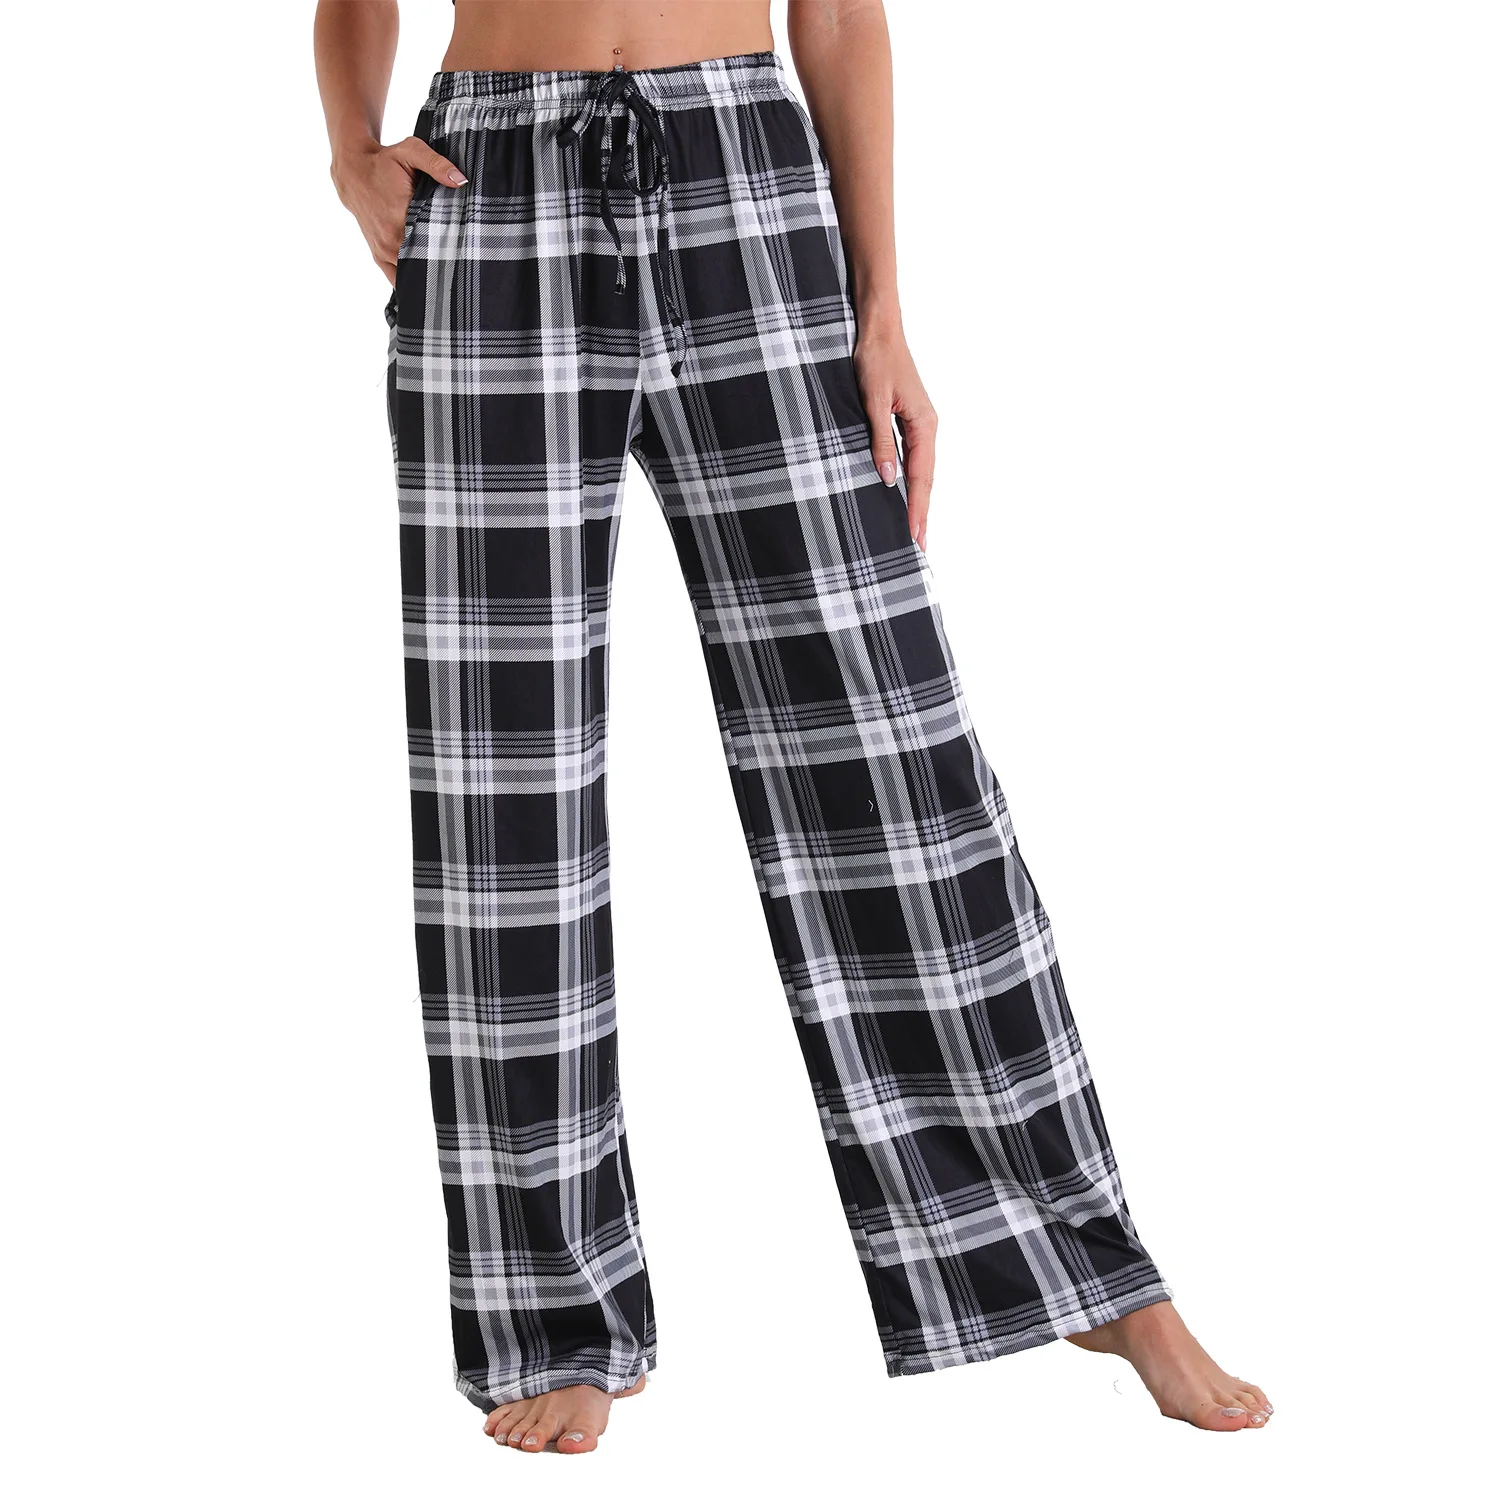 

croft and barrow valentines black white buffalo plaid polyester cotton mens jogger pajama pants with pockets, Picture shows